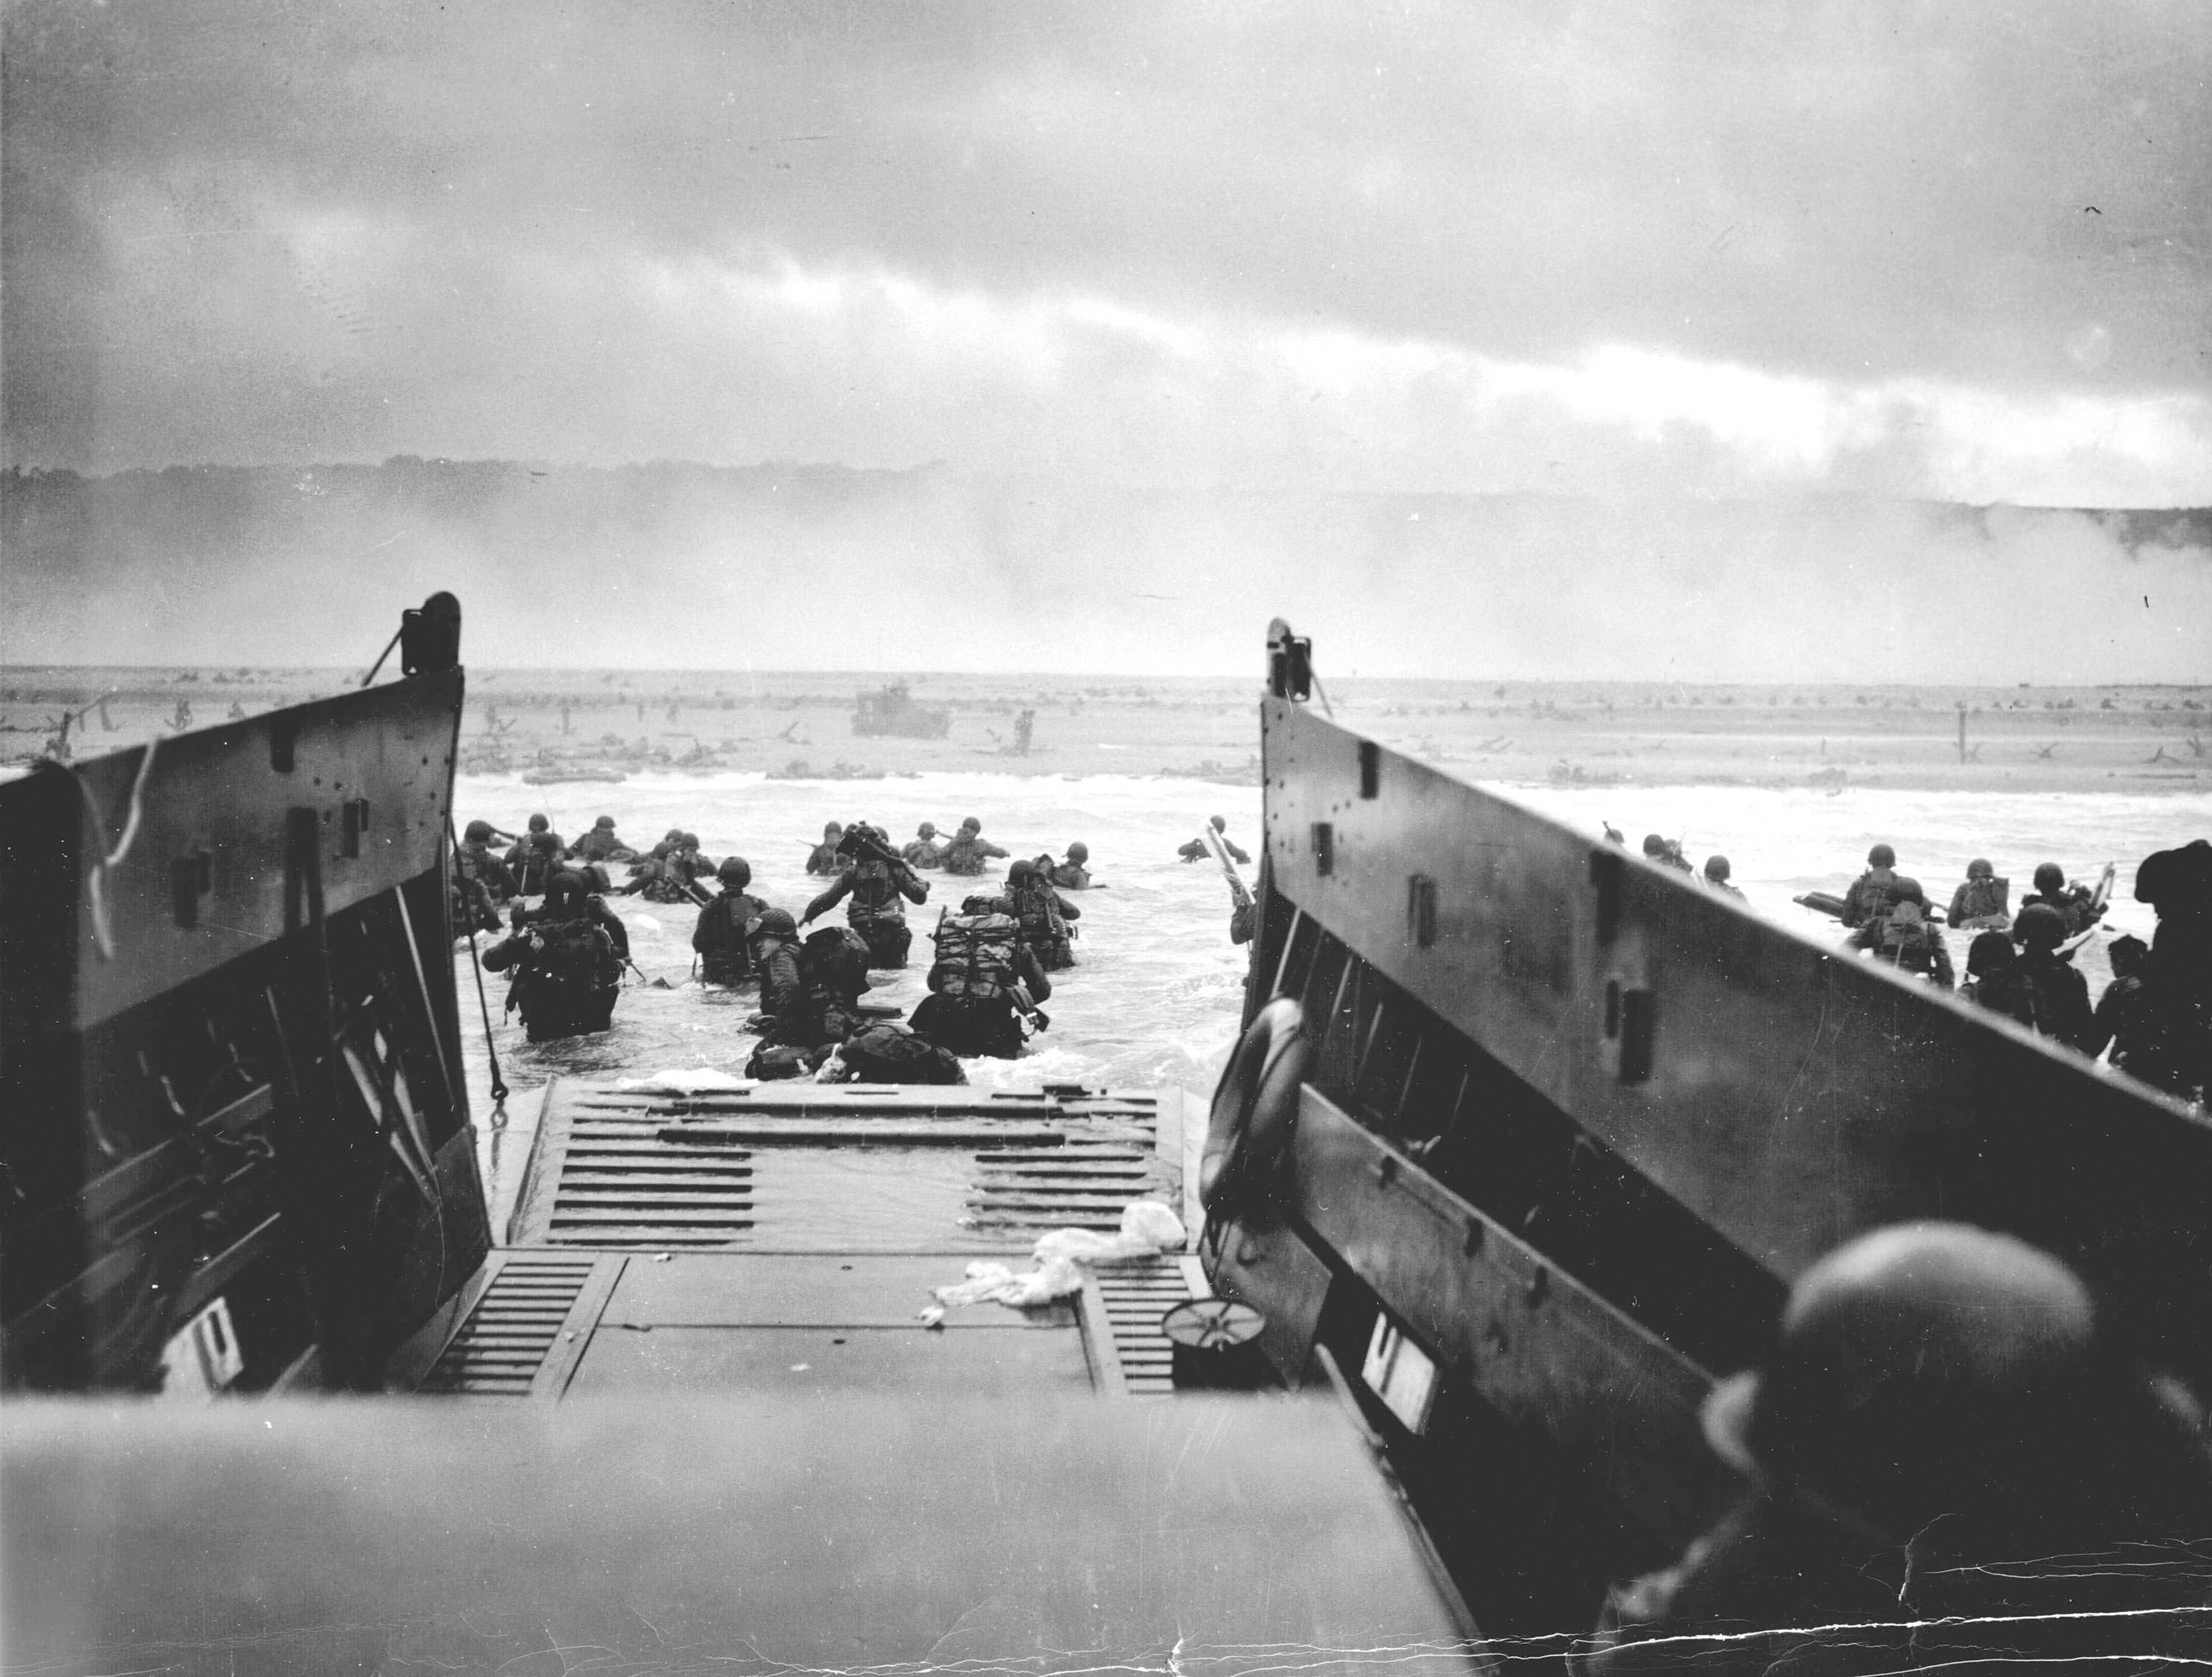 Handout photo of U.S. troops wading ashore from a Coast Guard landing craft at Omaha Beach during the Normandy D-Day landings near Vierville sur Mer